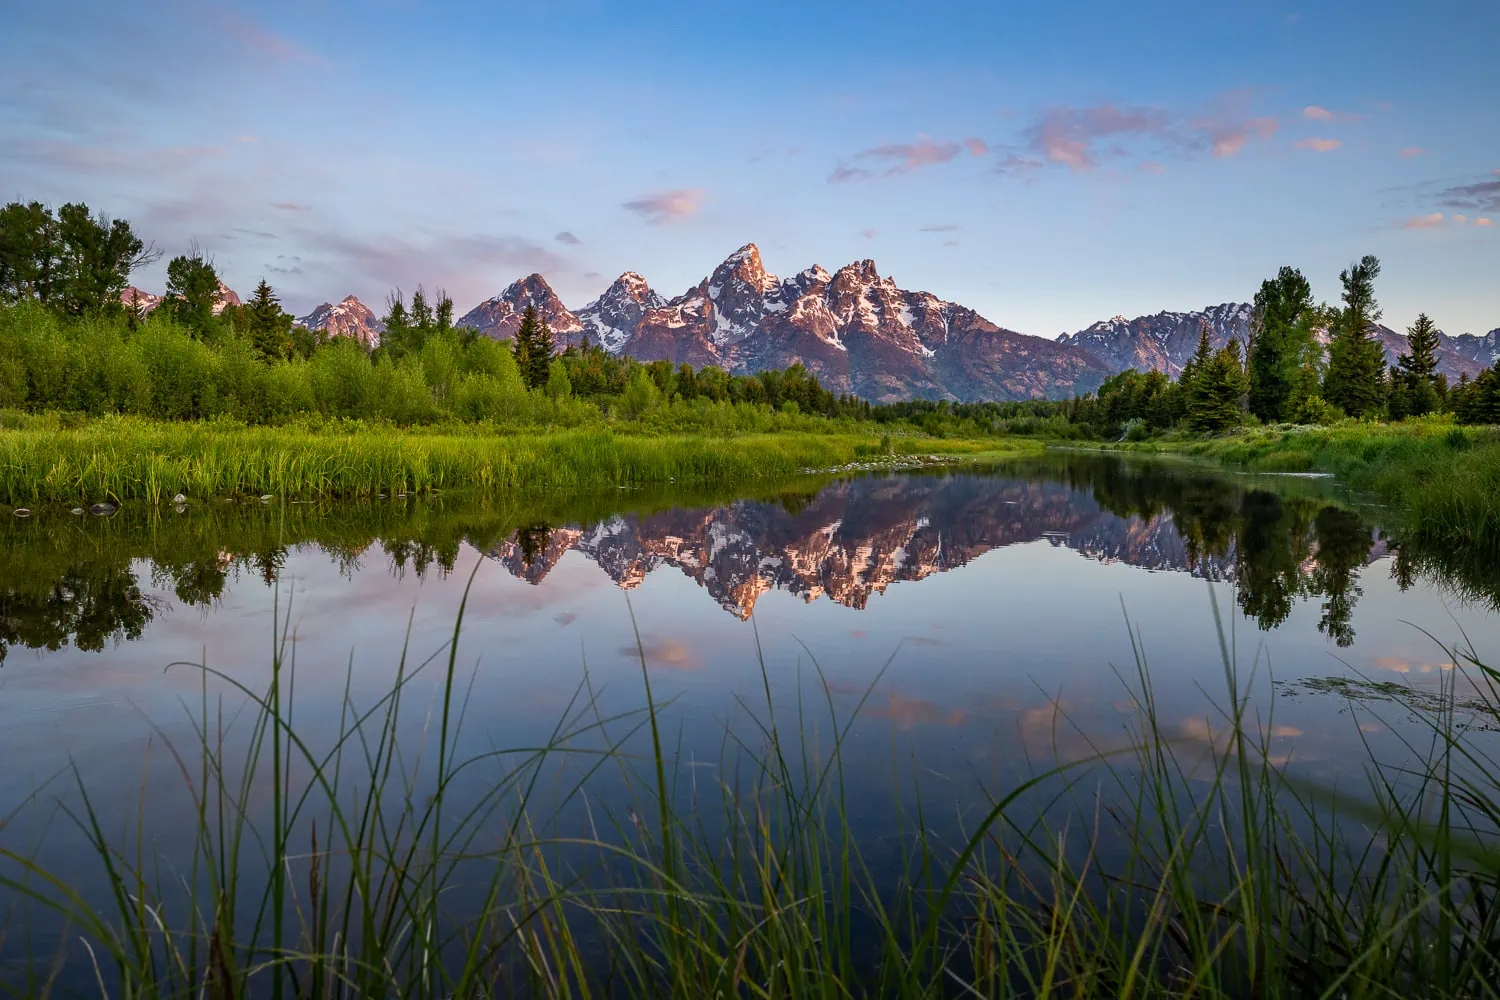 A beautiful landscape photo of Grand Tetons National Park taken by photographer Lucy Schultz.